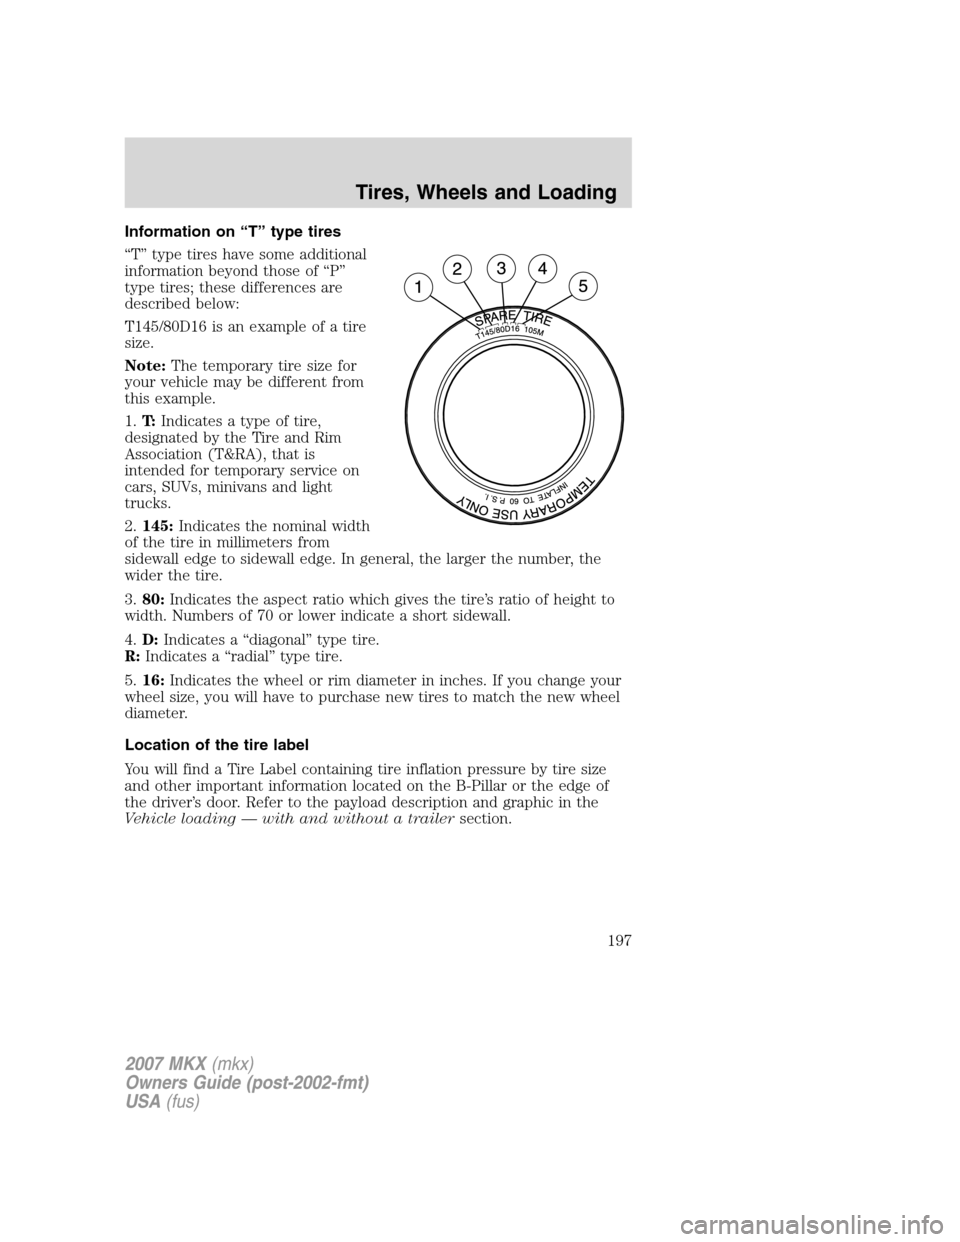 LINCOLN MKX 2007  Owners Manual Information on “T” type tires
“T” type tires have some additional
information beyond those of “P”
type tires; these differences are
described below:
T145/80D16 is an example of a tire
size